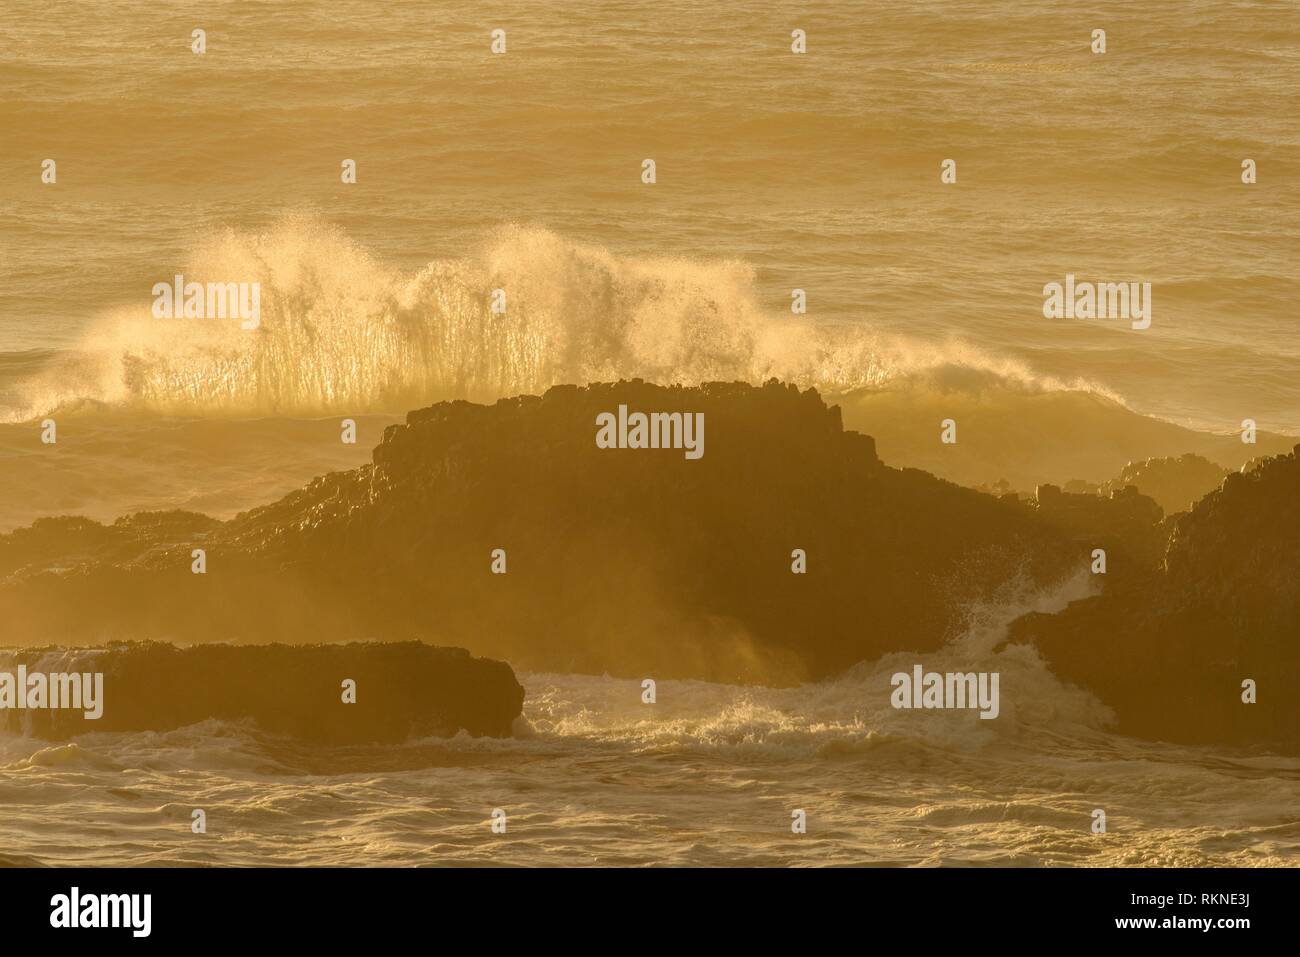 Seal Rocks and pounding surf near sunset, Seal Rock State Recreation Site, Seal Rock, Oregon, USA. Stock Photo